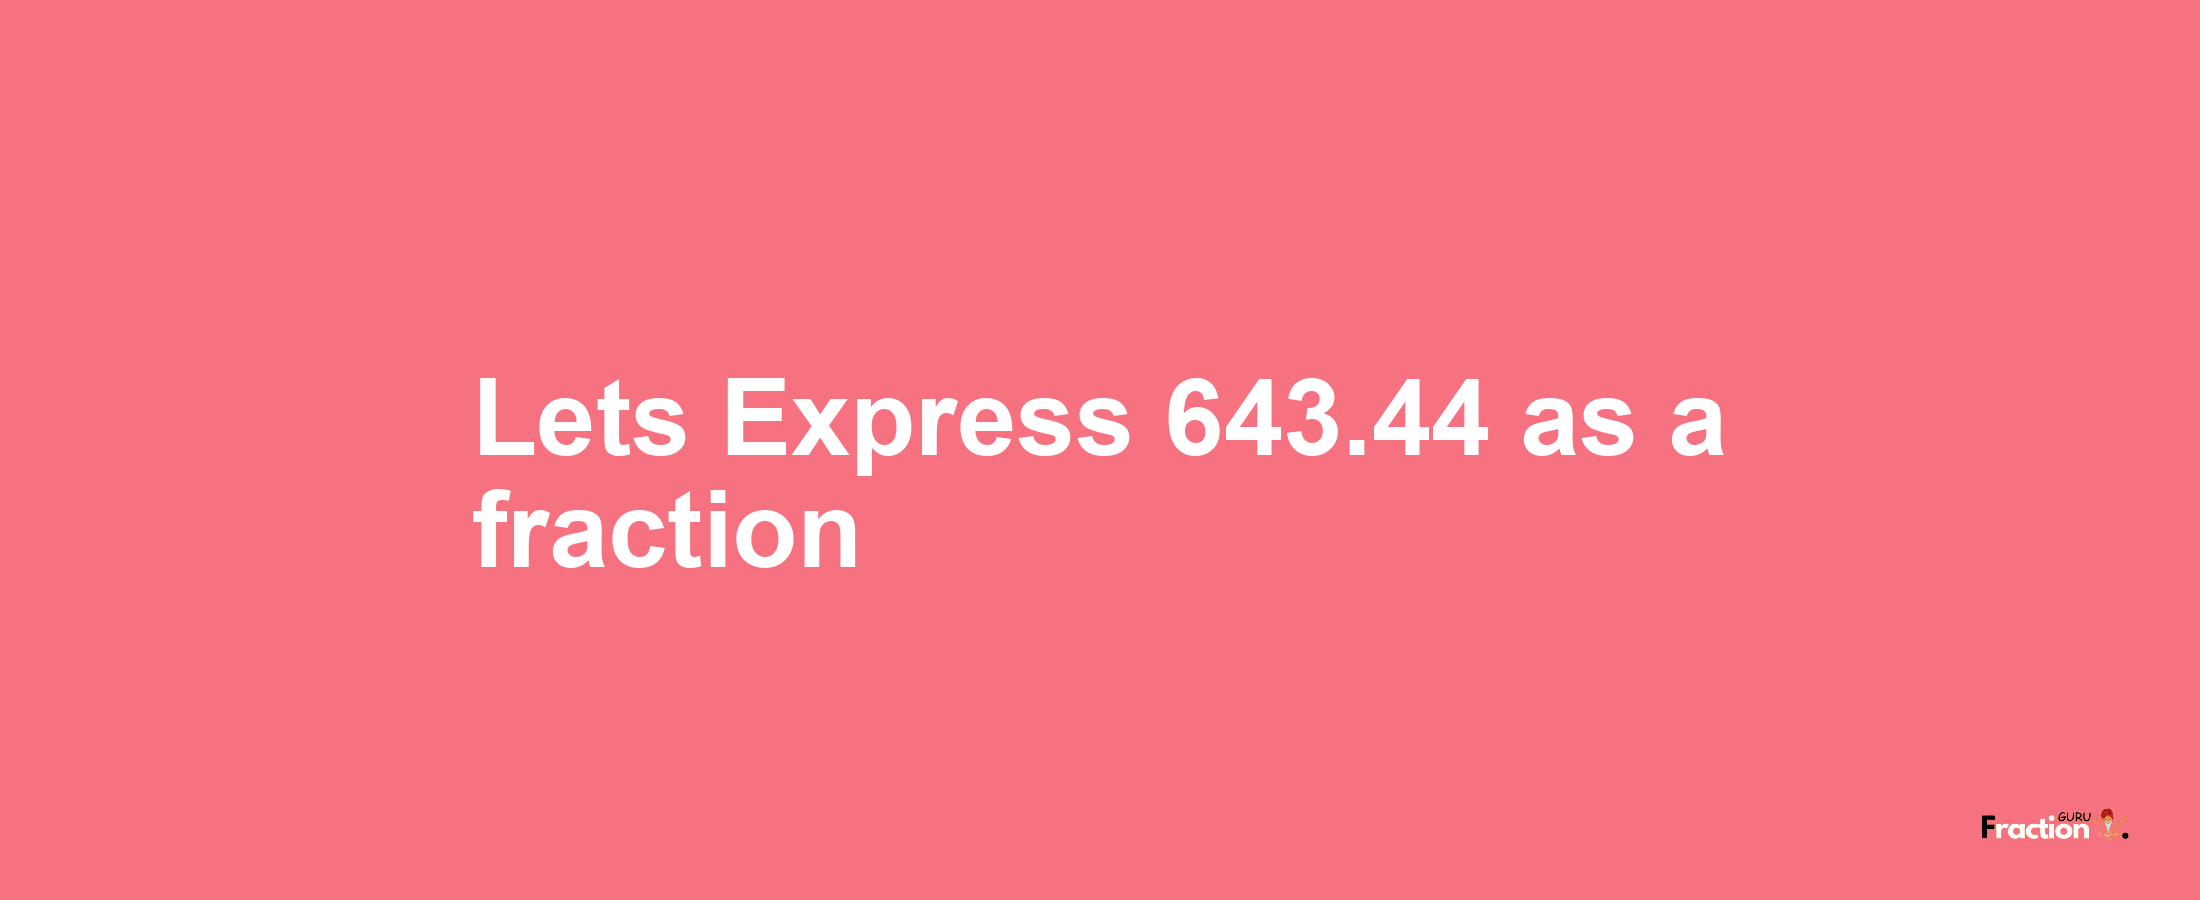 Lets Express 643.44 as afraction